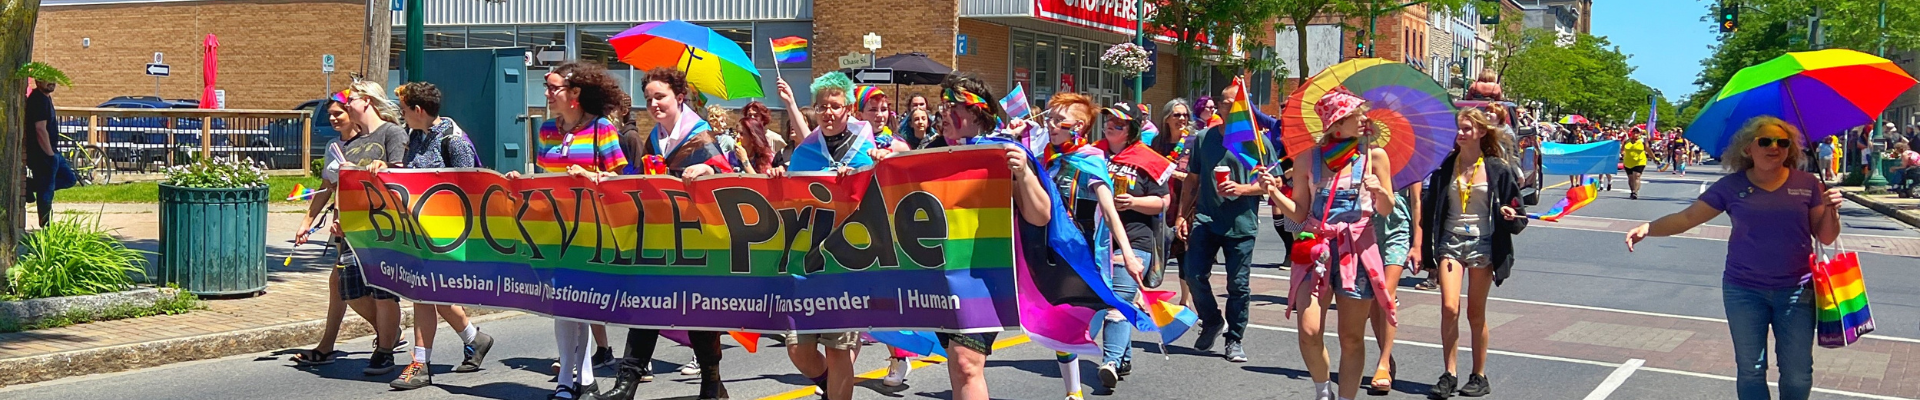 Community supporters march in the annual Pride Parade down king street wearing rainbow items, holding rainbow umbrellas, an carrying a Brockville Pride banner